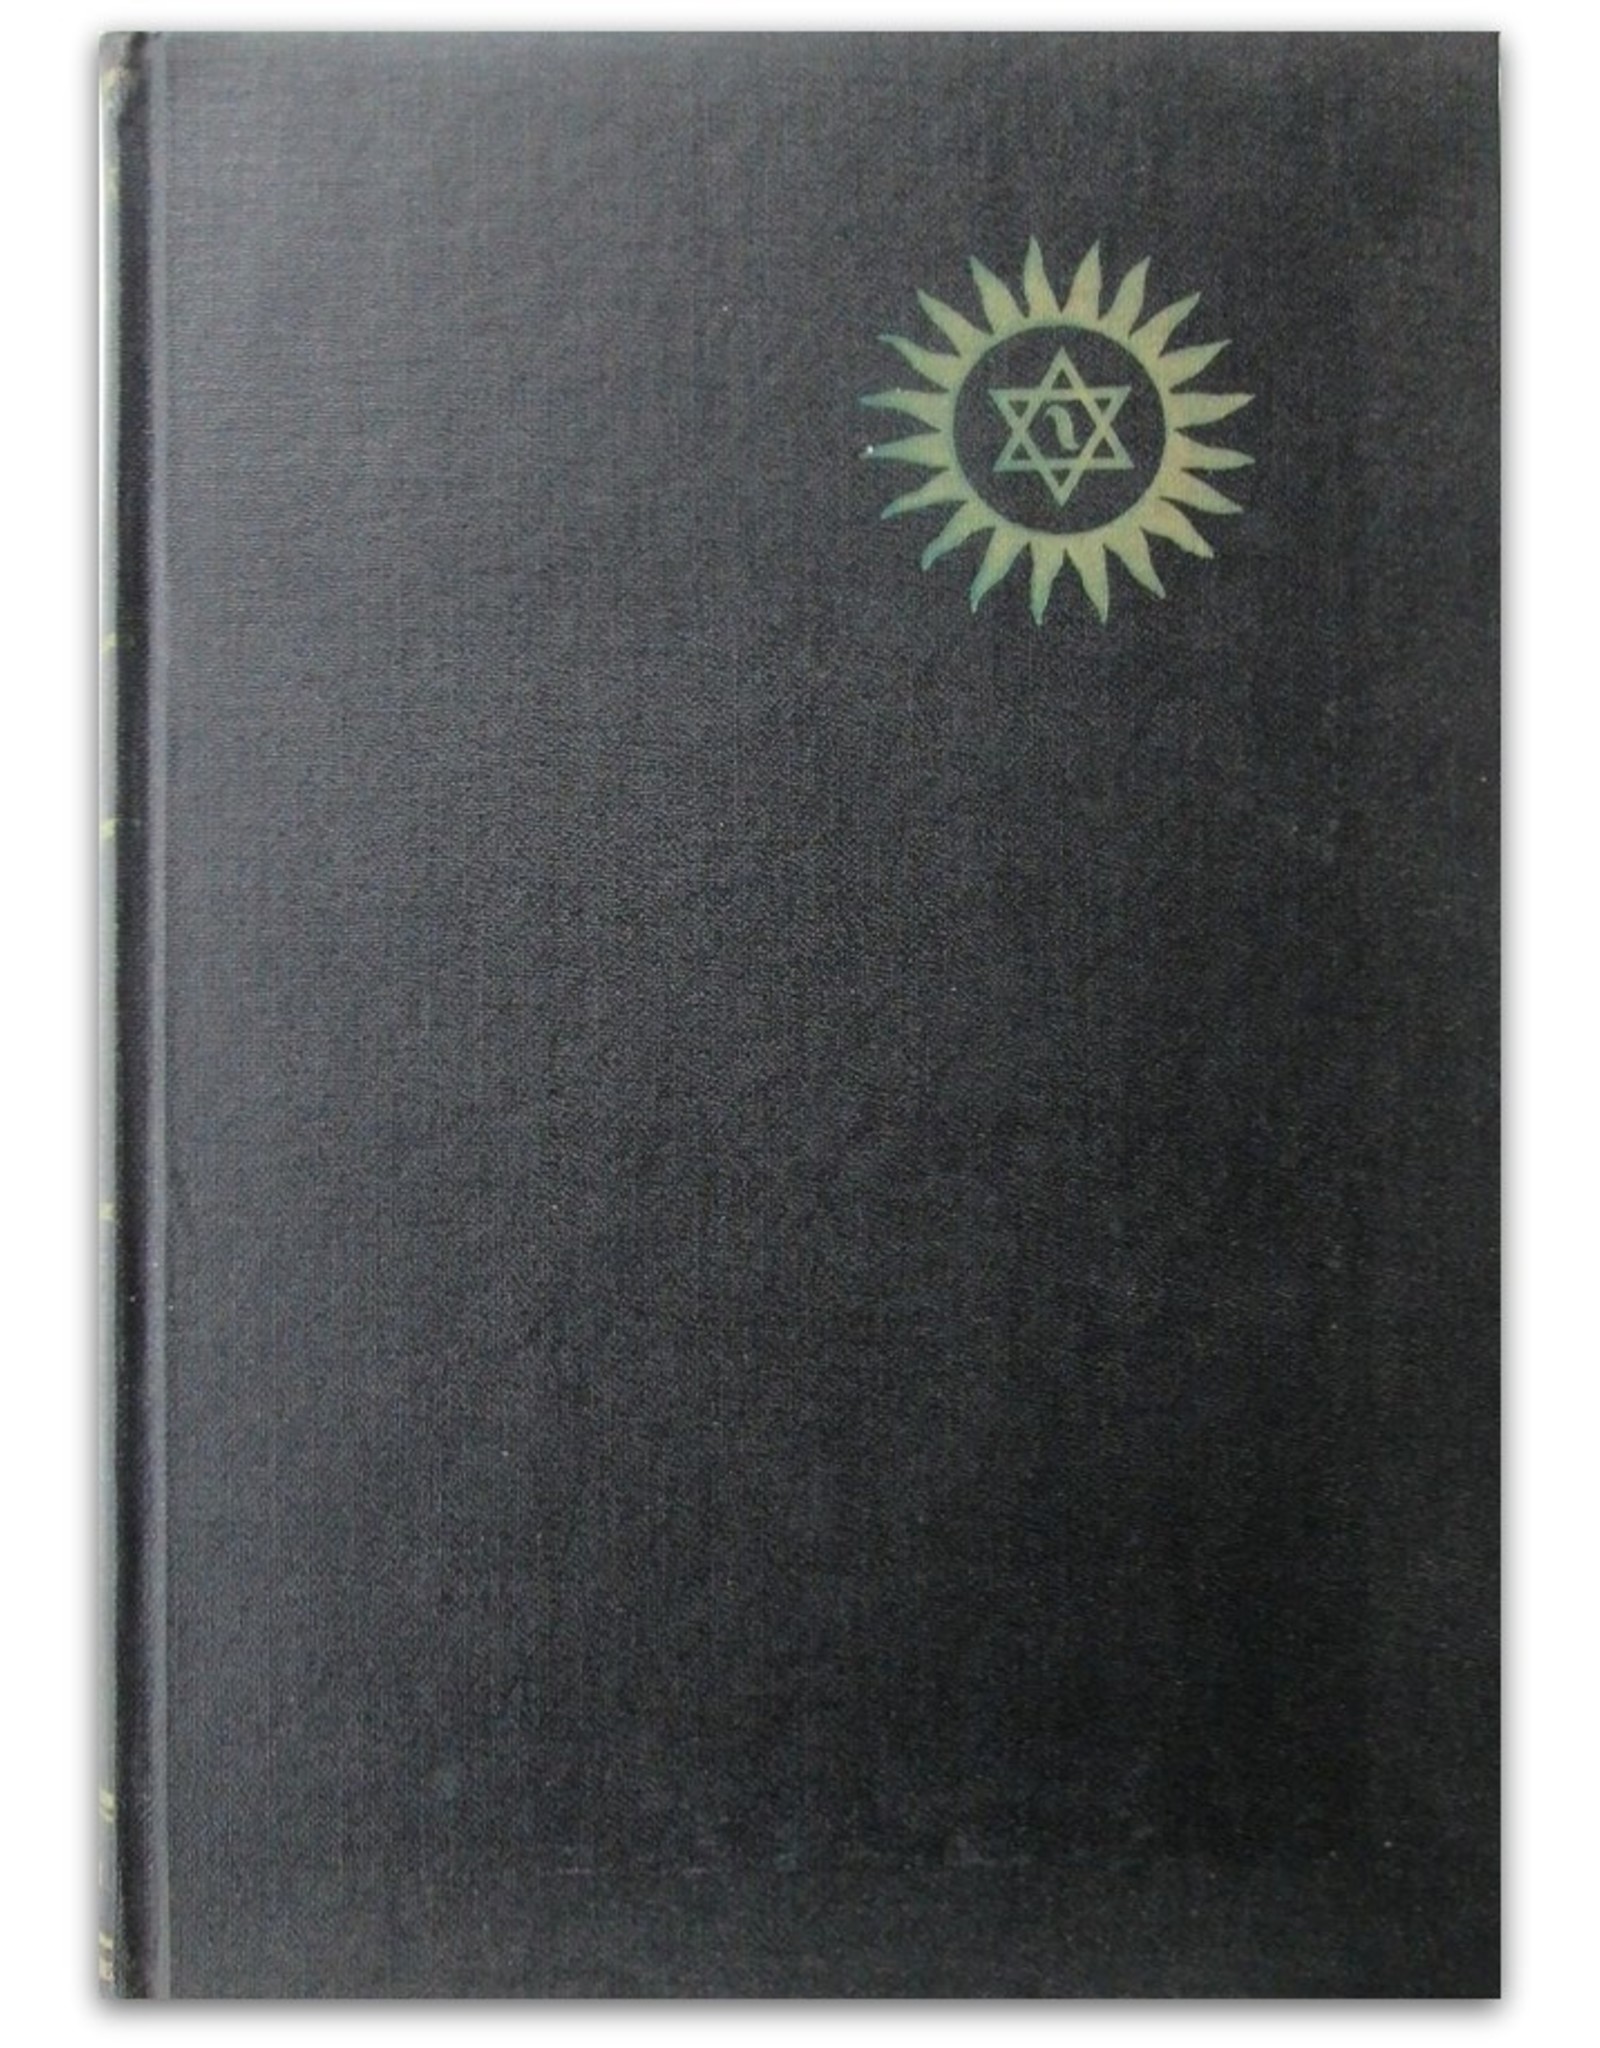 Arthur Edward Waite - The Book of Black Magic And Of Pacts. Including the Rites and Mysteries of Goetic Theurgy, Sorcery and Infernal Necromancy. The London Edition of 1898 Faithfully Reproduced